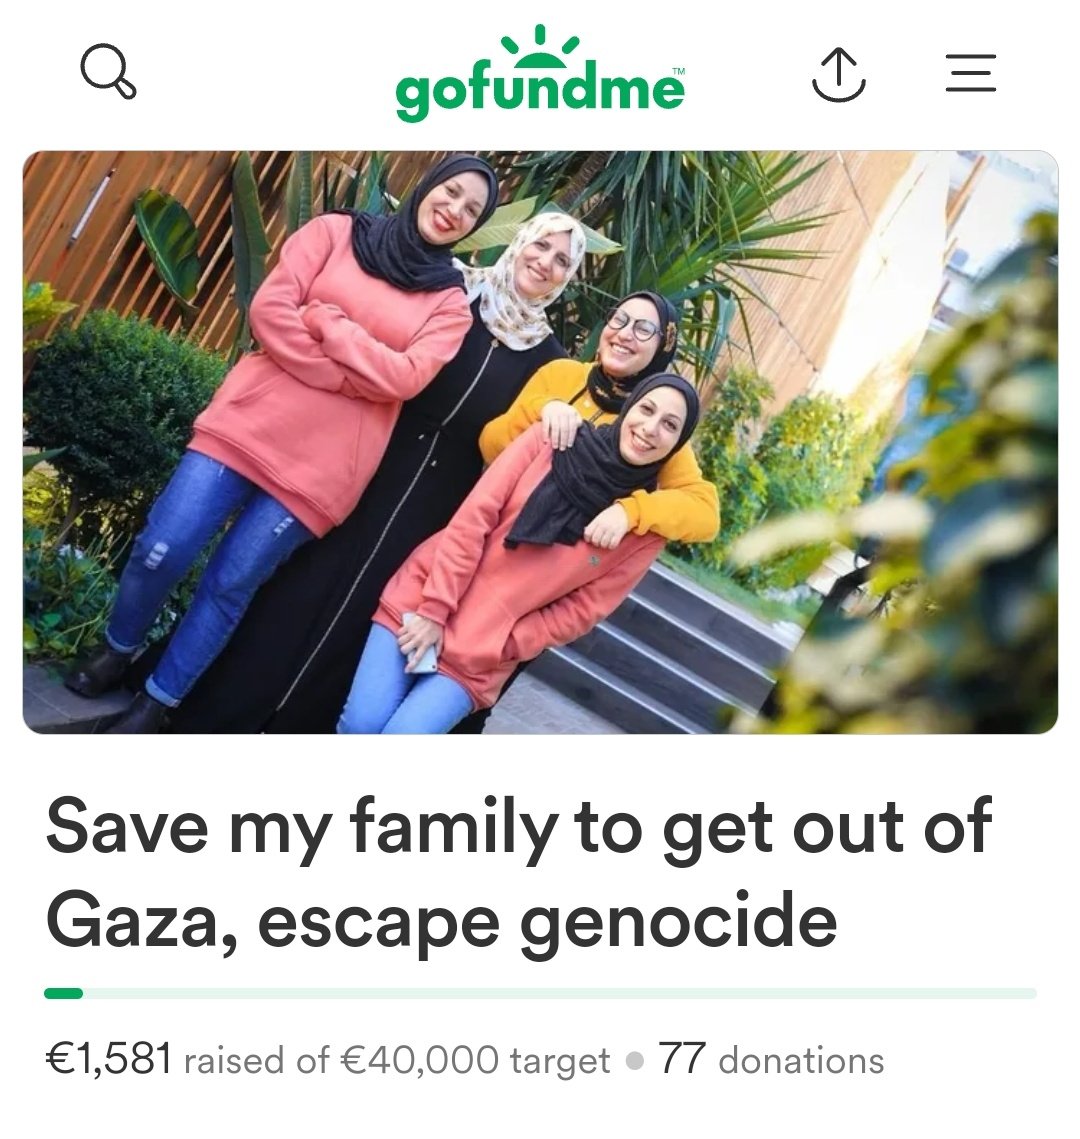 We need to boost this!! please help Renad and her family evacuate gaza, there's only 77 donations. Donate and share this as much as you can!! gofund.me/6b146b4d